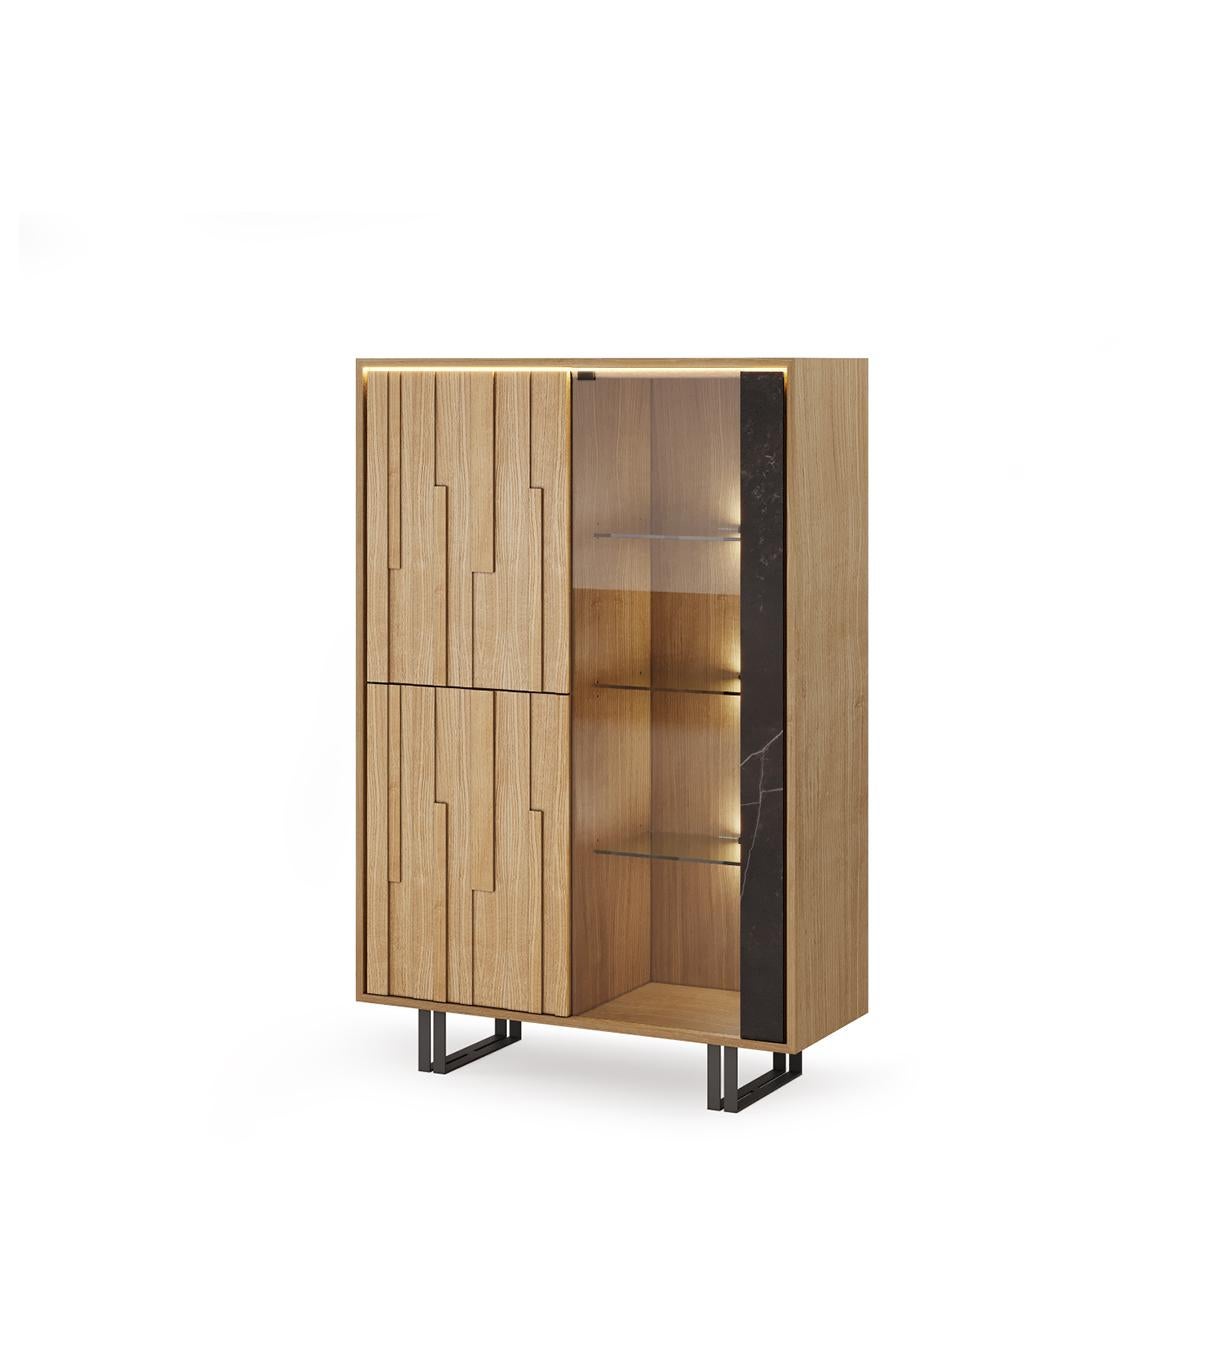 This modern storage design works effortlessly in any setting, crafted for durability, functionality and beauty, the Everest Display Cabinet offers contemporary options for displaying your décor items.